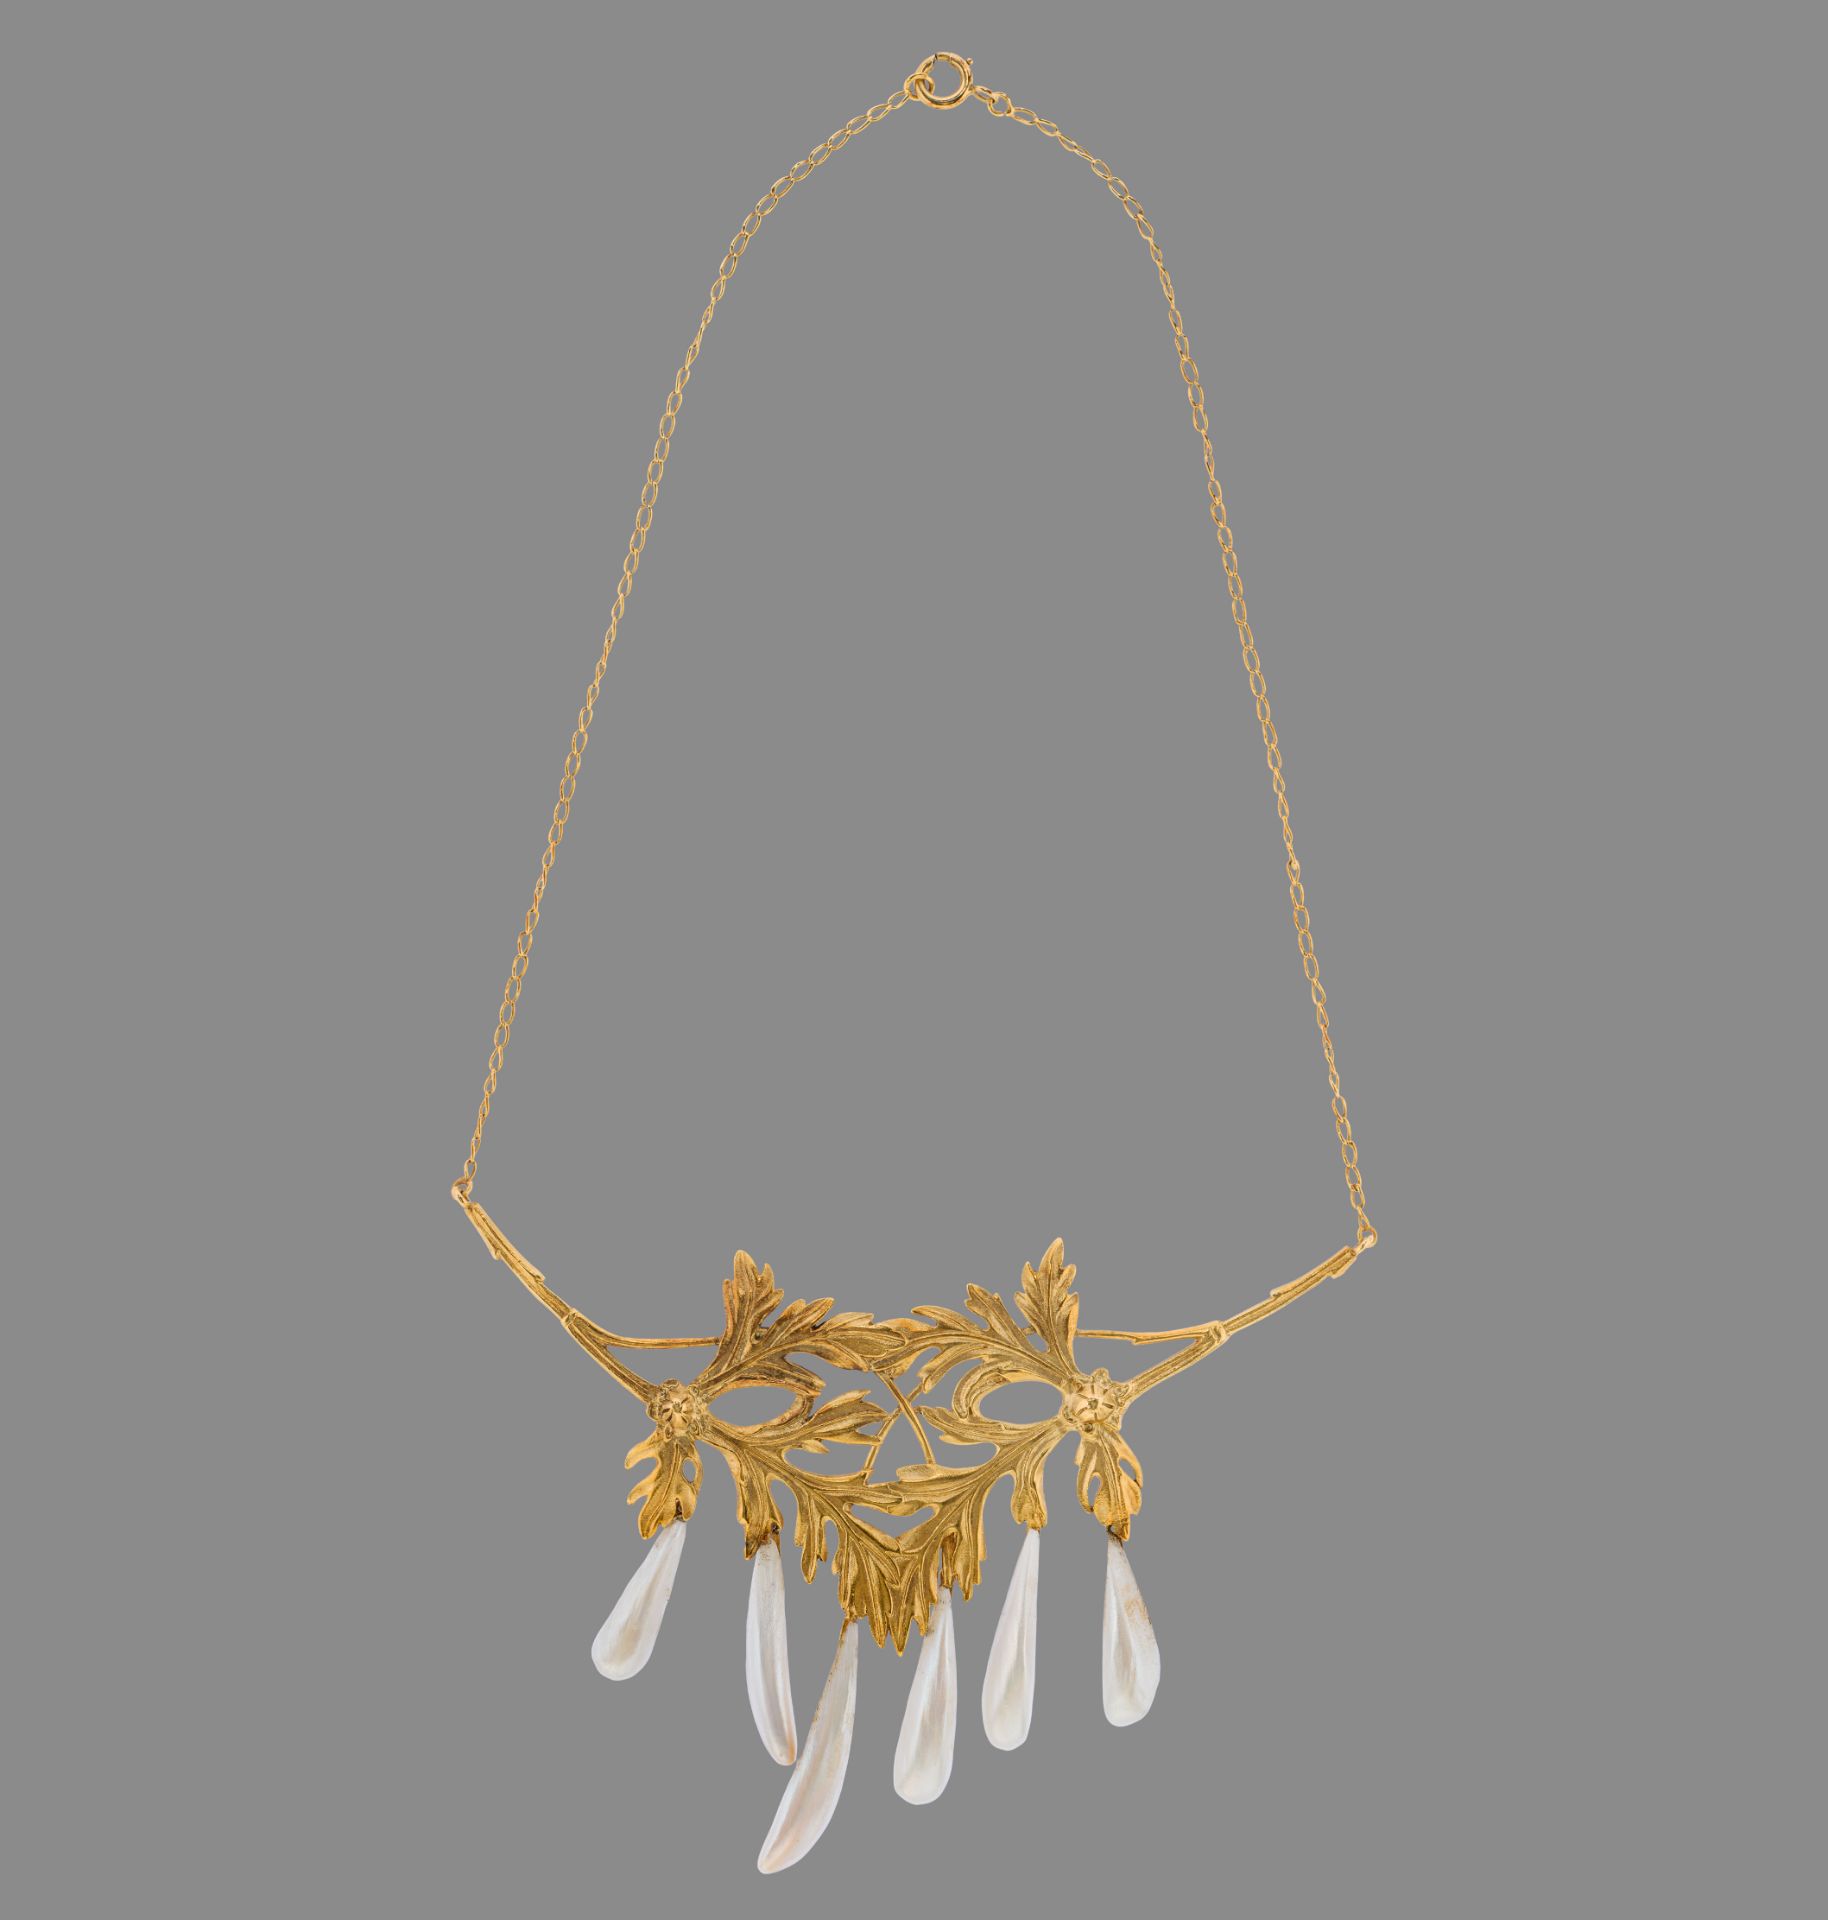 Art Nouveau necklace with freshwater pearls